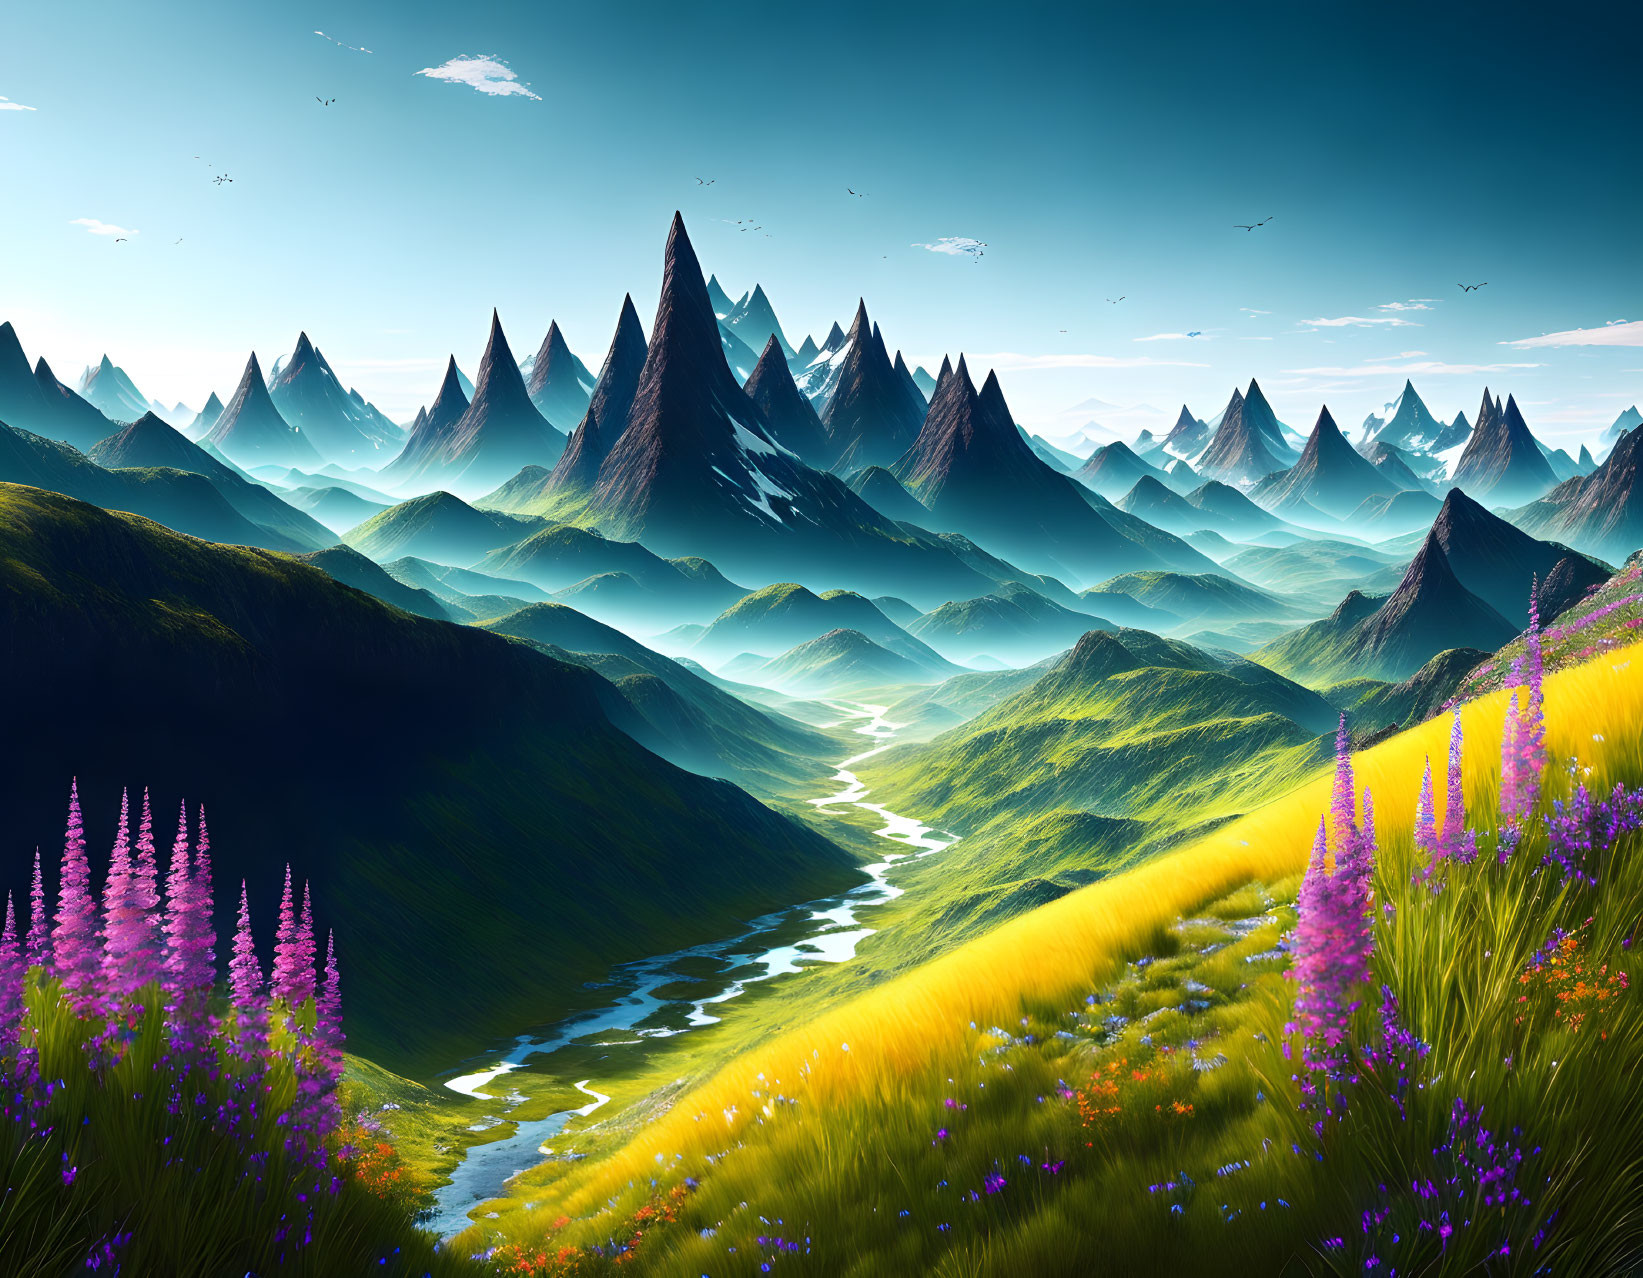 Colorful digital landscape with mountain peaks, river, meadows, and birds